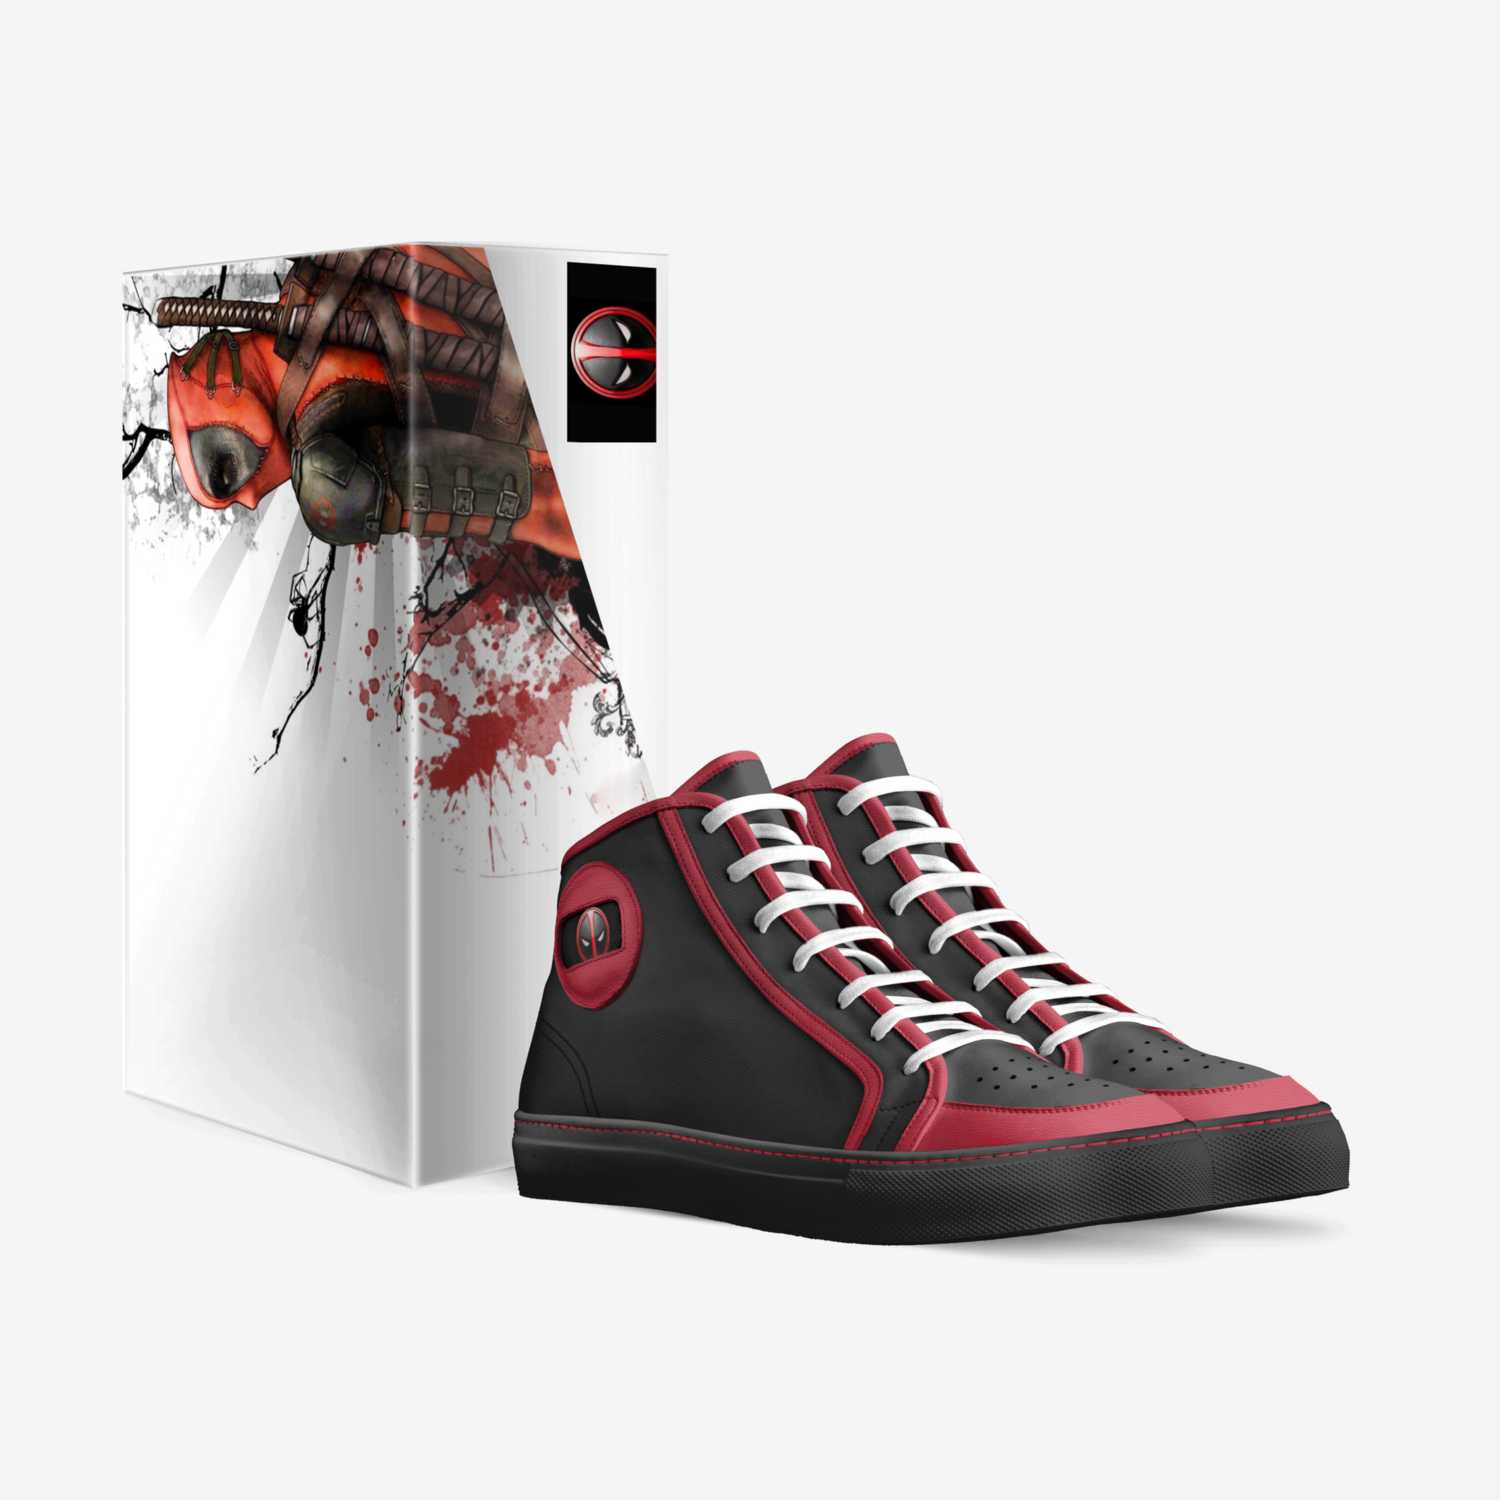 Deadpool custom made in Italy shoes by Eric Lloyed Davis | Box view